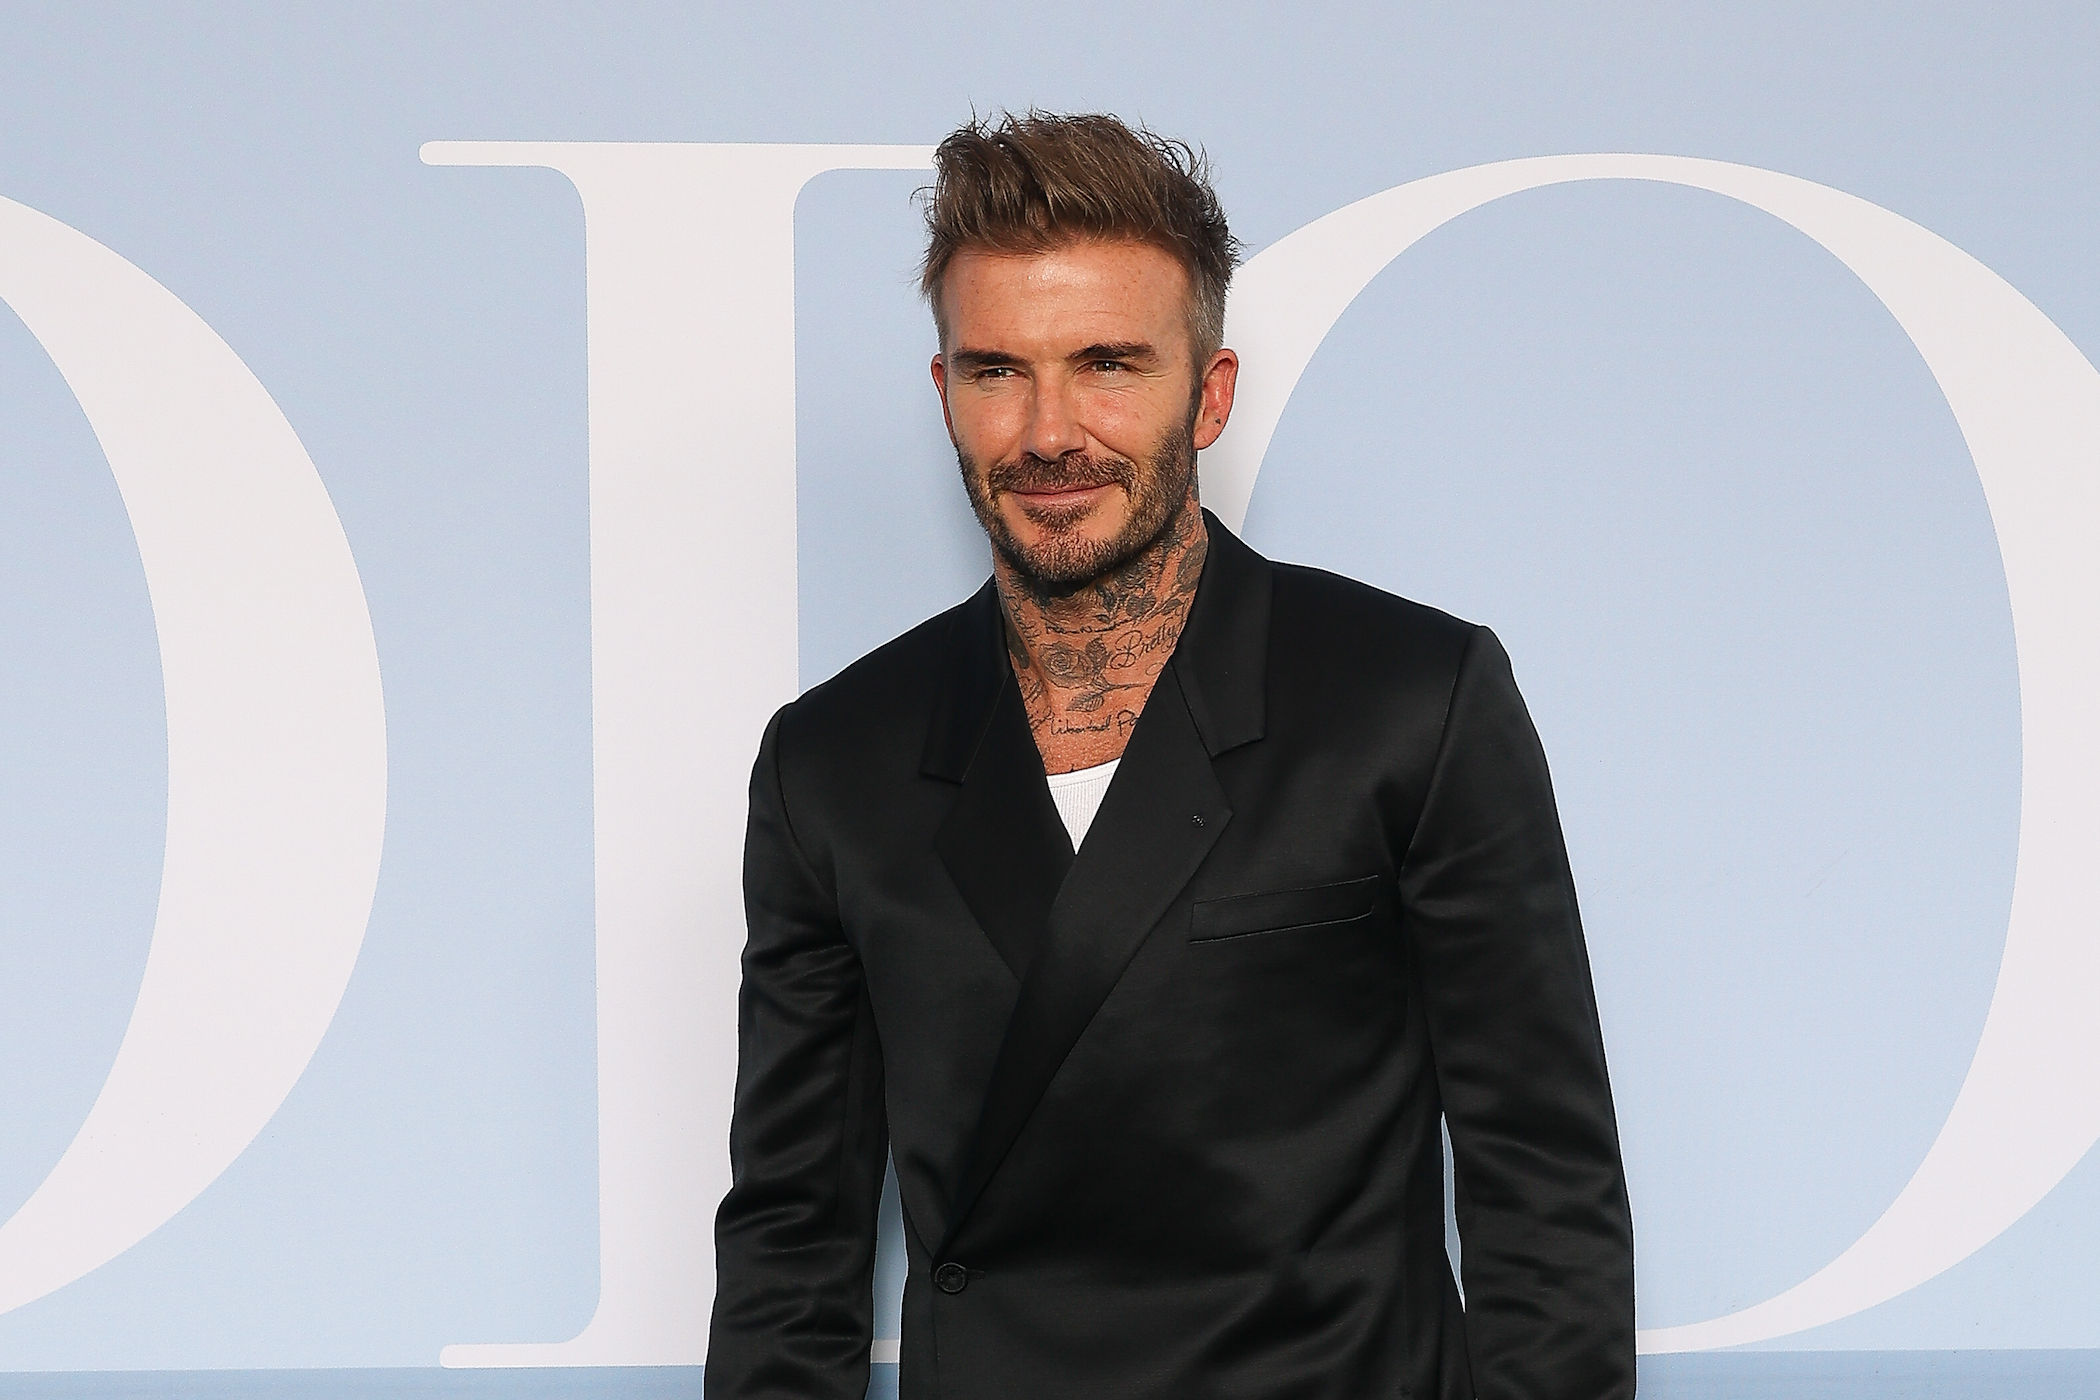 Afspejling Megalopolis Bugt David Beckham and 14 other famous people born in the Year of the Rabbit